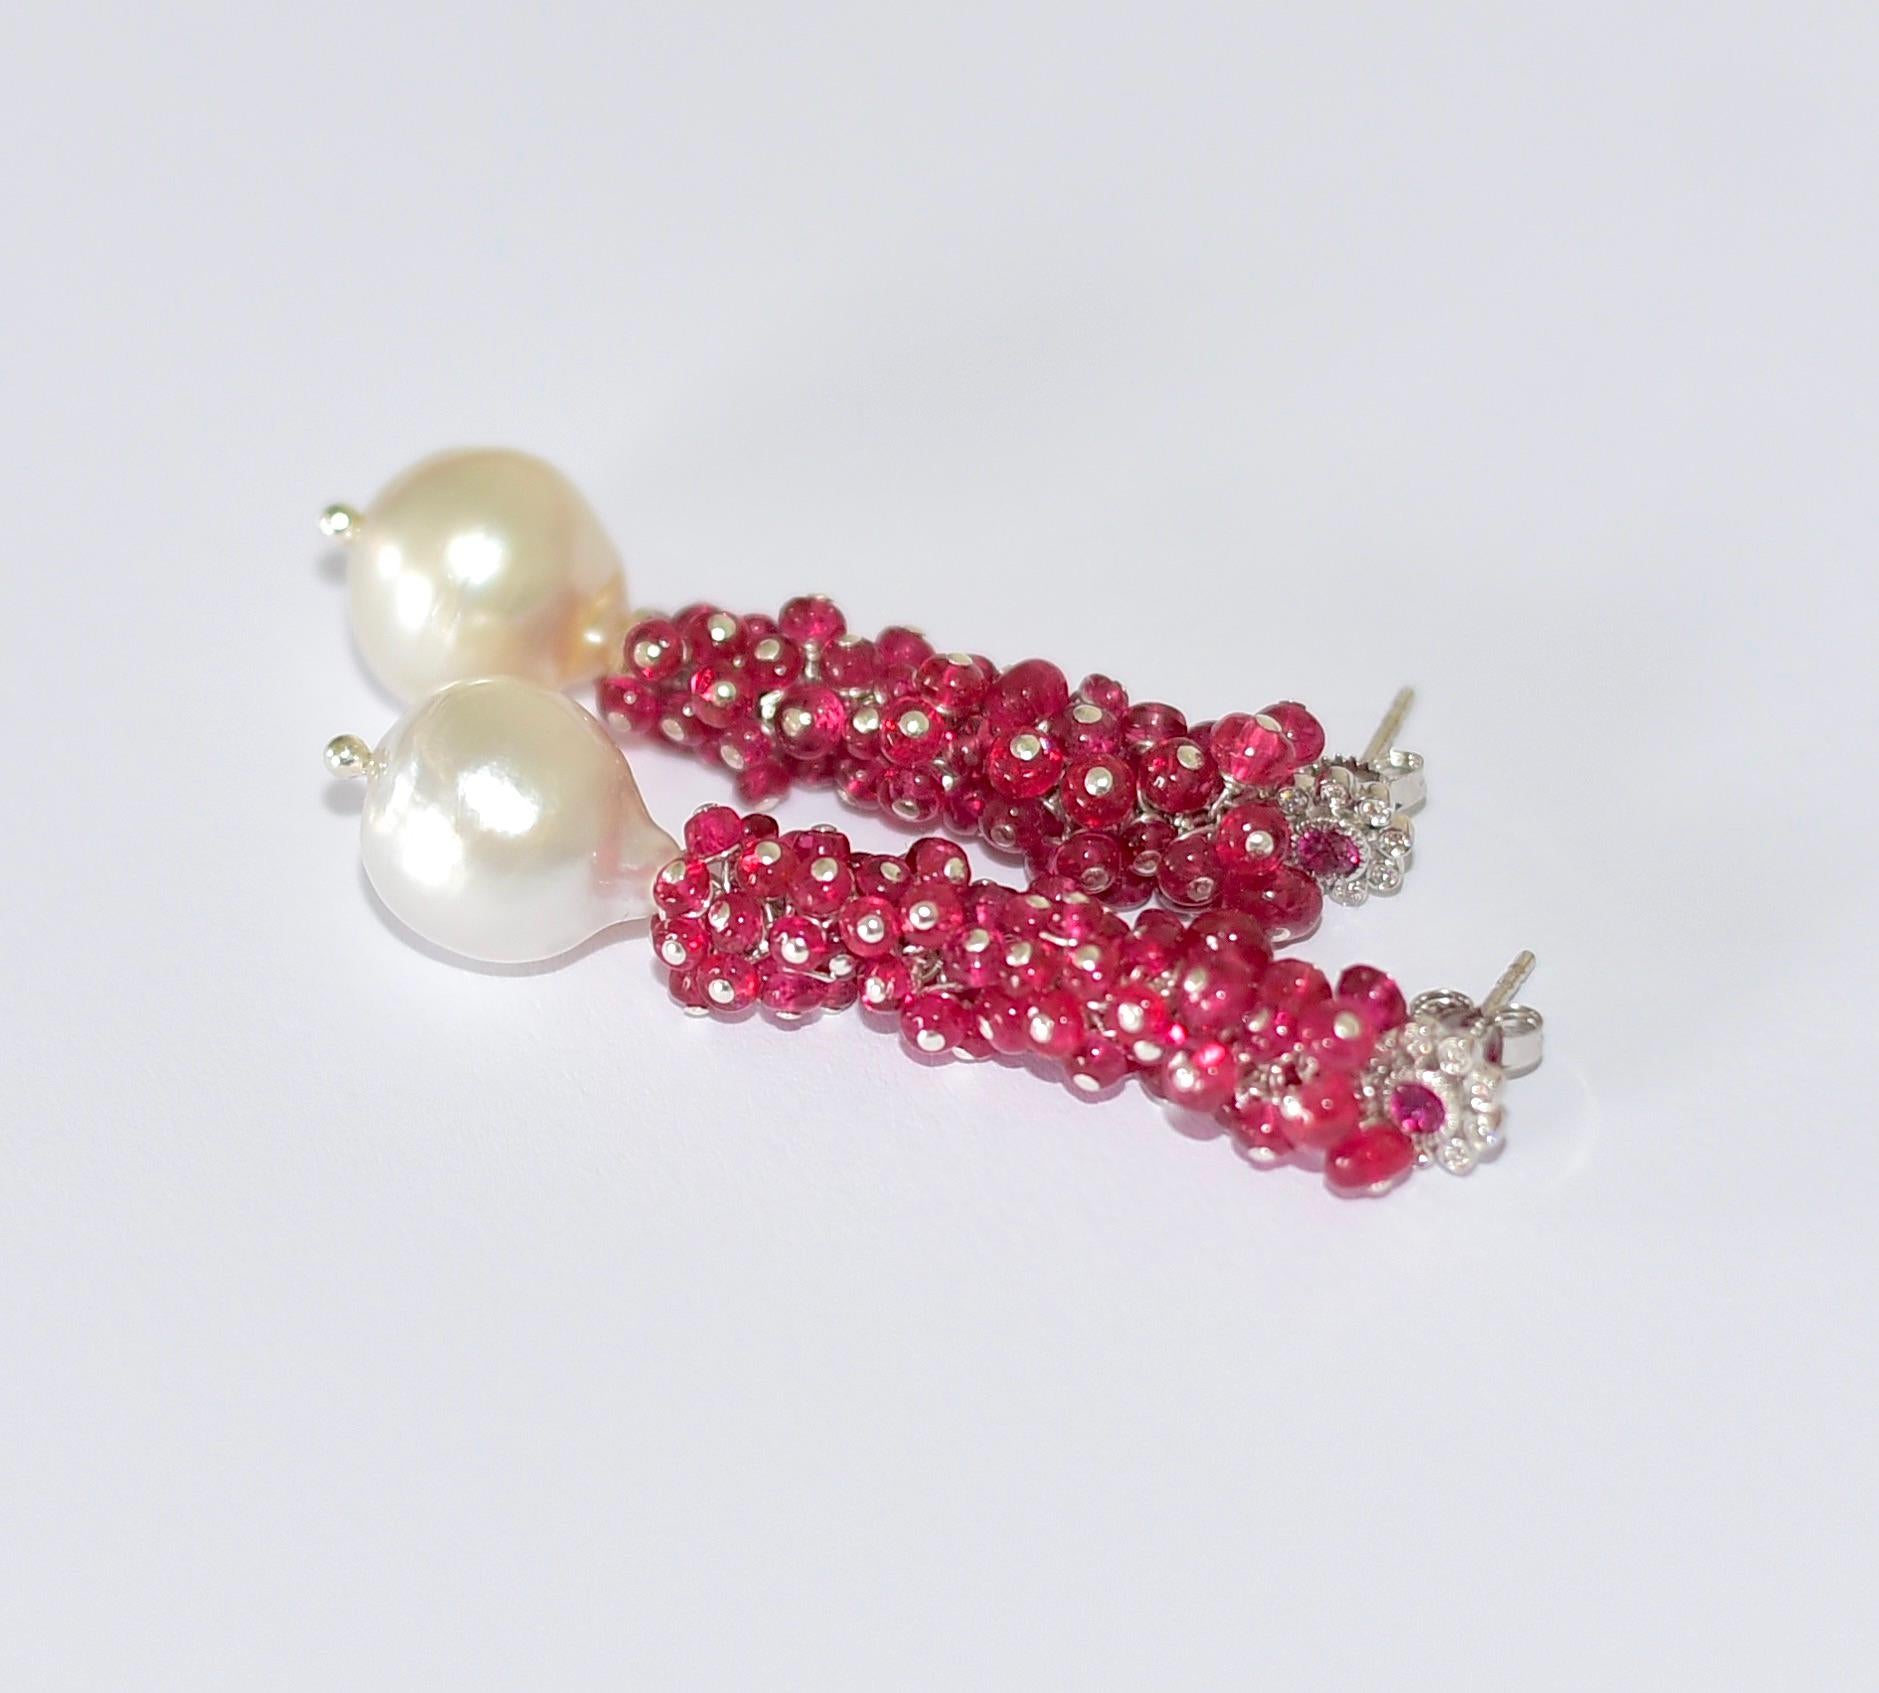 Women's  Ruby Red Burmese Spinel, South Sea Pearl Earrings in 14K Solid White Gold